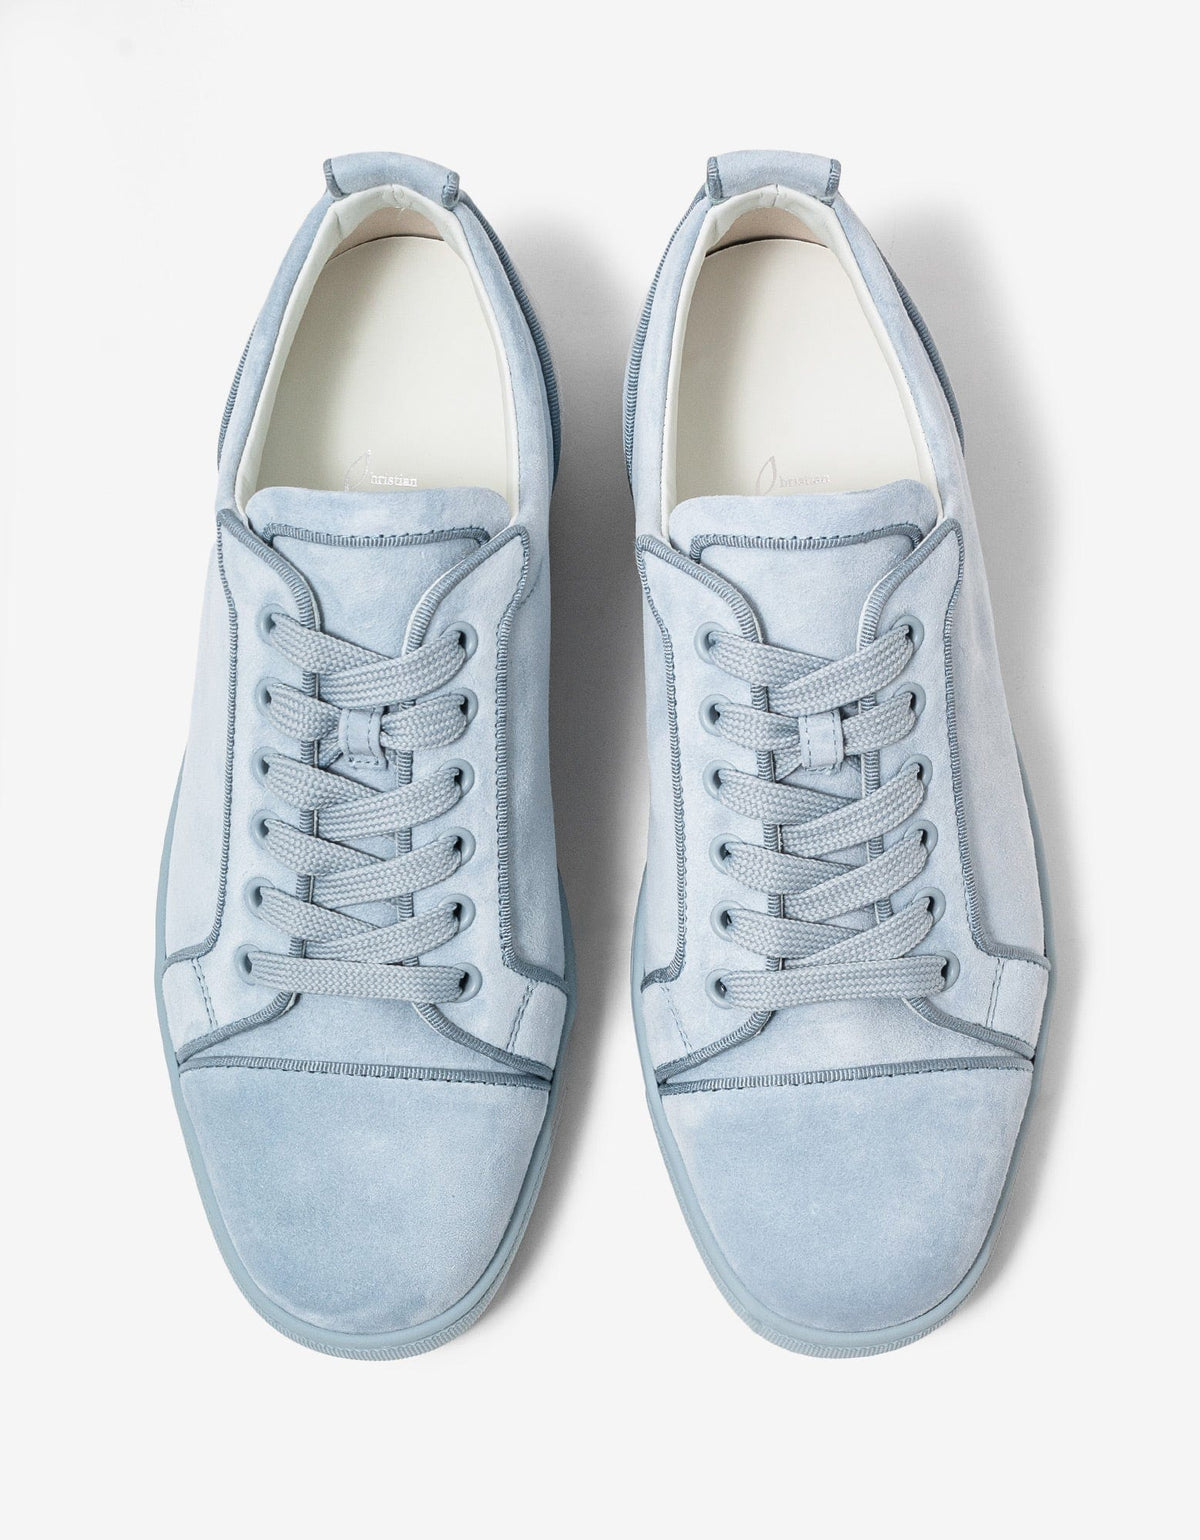 Christian Louboutin Louis Junior Orlato Paseo Blue Suede Trainers